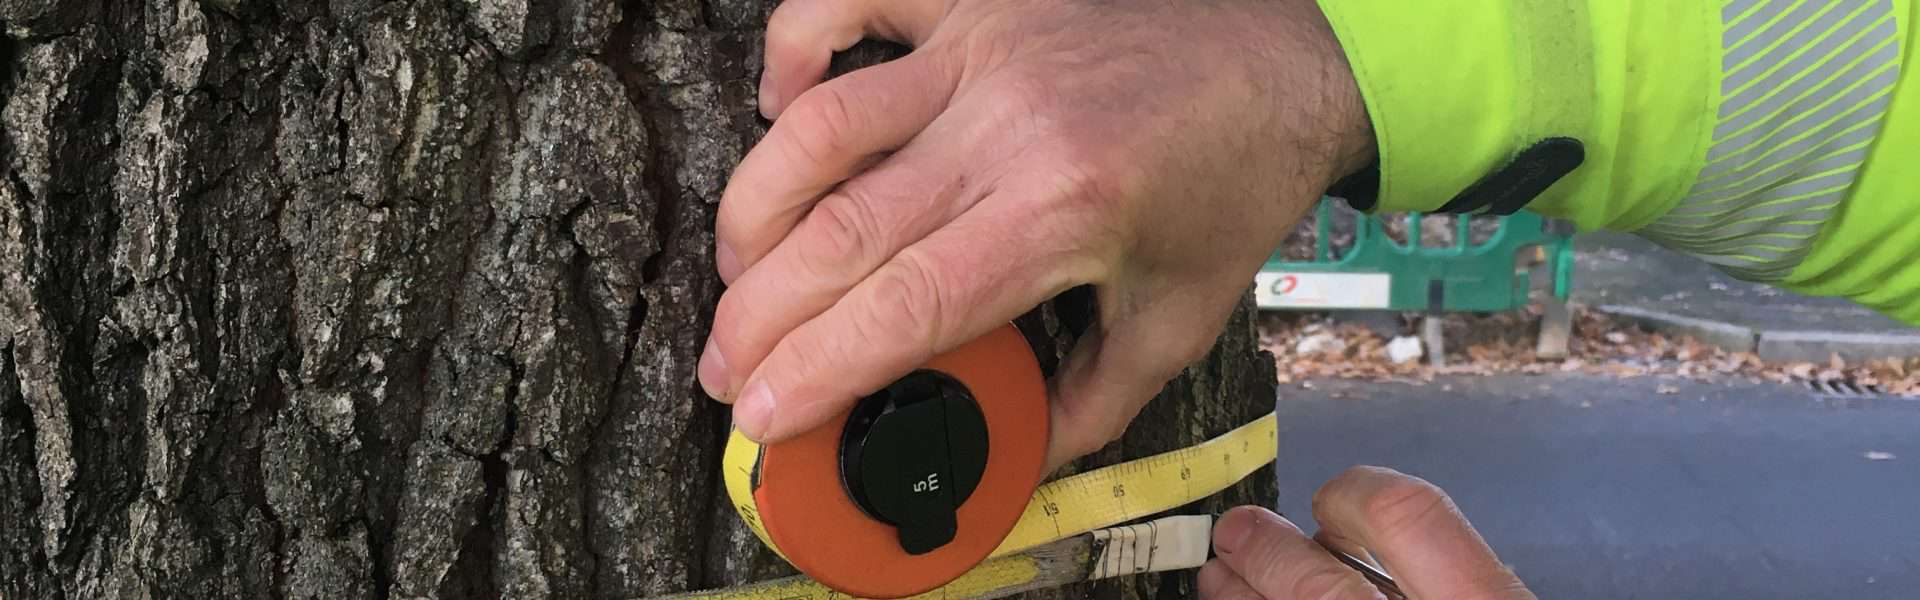 A member of the Connick Tree Care team measuring the trunk of a tree